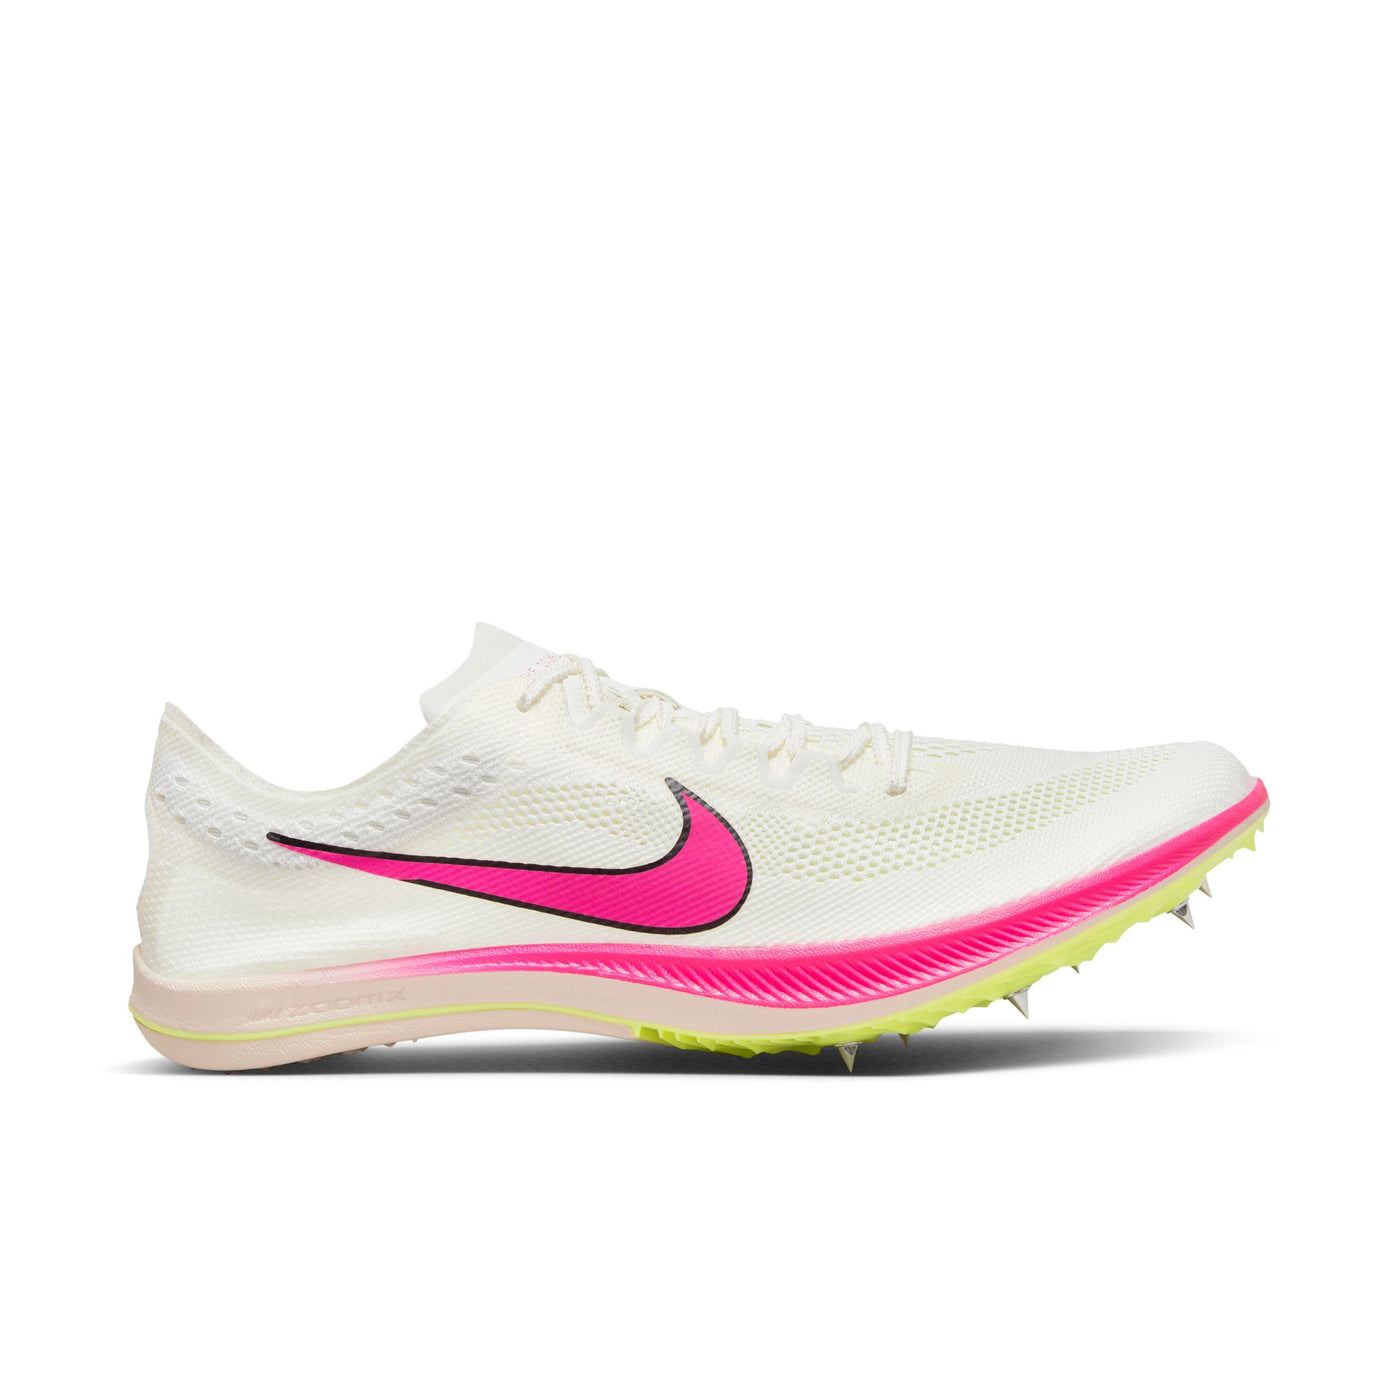 Unisex Nike ZoomX Dragonfly Distance Spike - CV0400-101